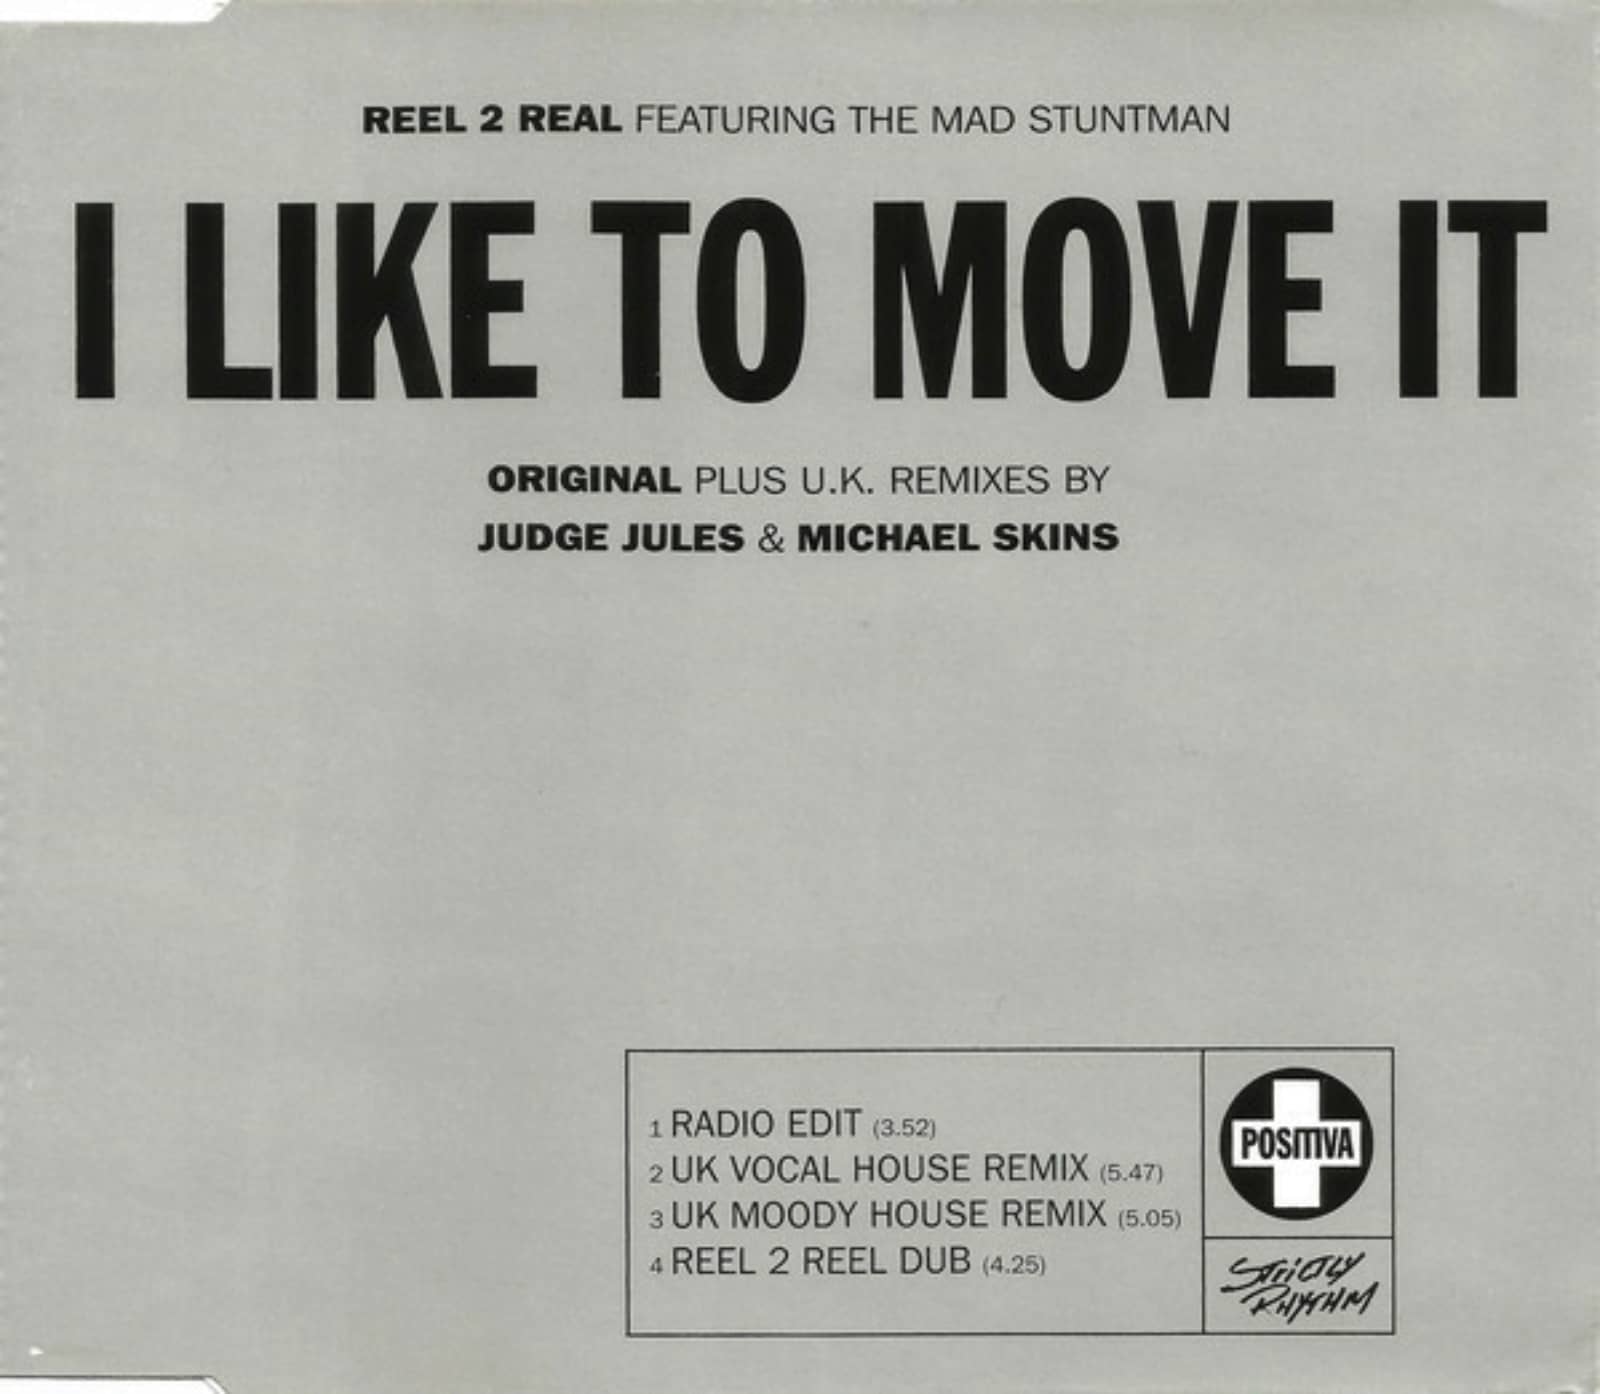 I like it is song. Real 2 real i like to move it обложка. Reel 2 real feat. The Mad Stuntman - i like to move it (feat. The Mad Stuntman). Reel 2 real - i like to move it. Reel 2 real feat. The Mad Stuntman - i like to move it (Radio Mix).